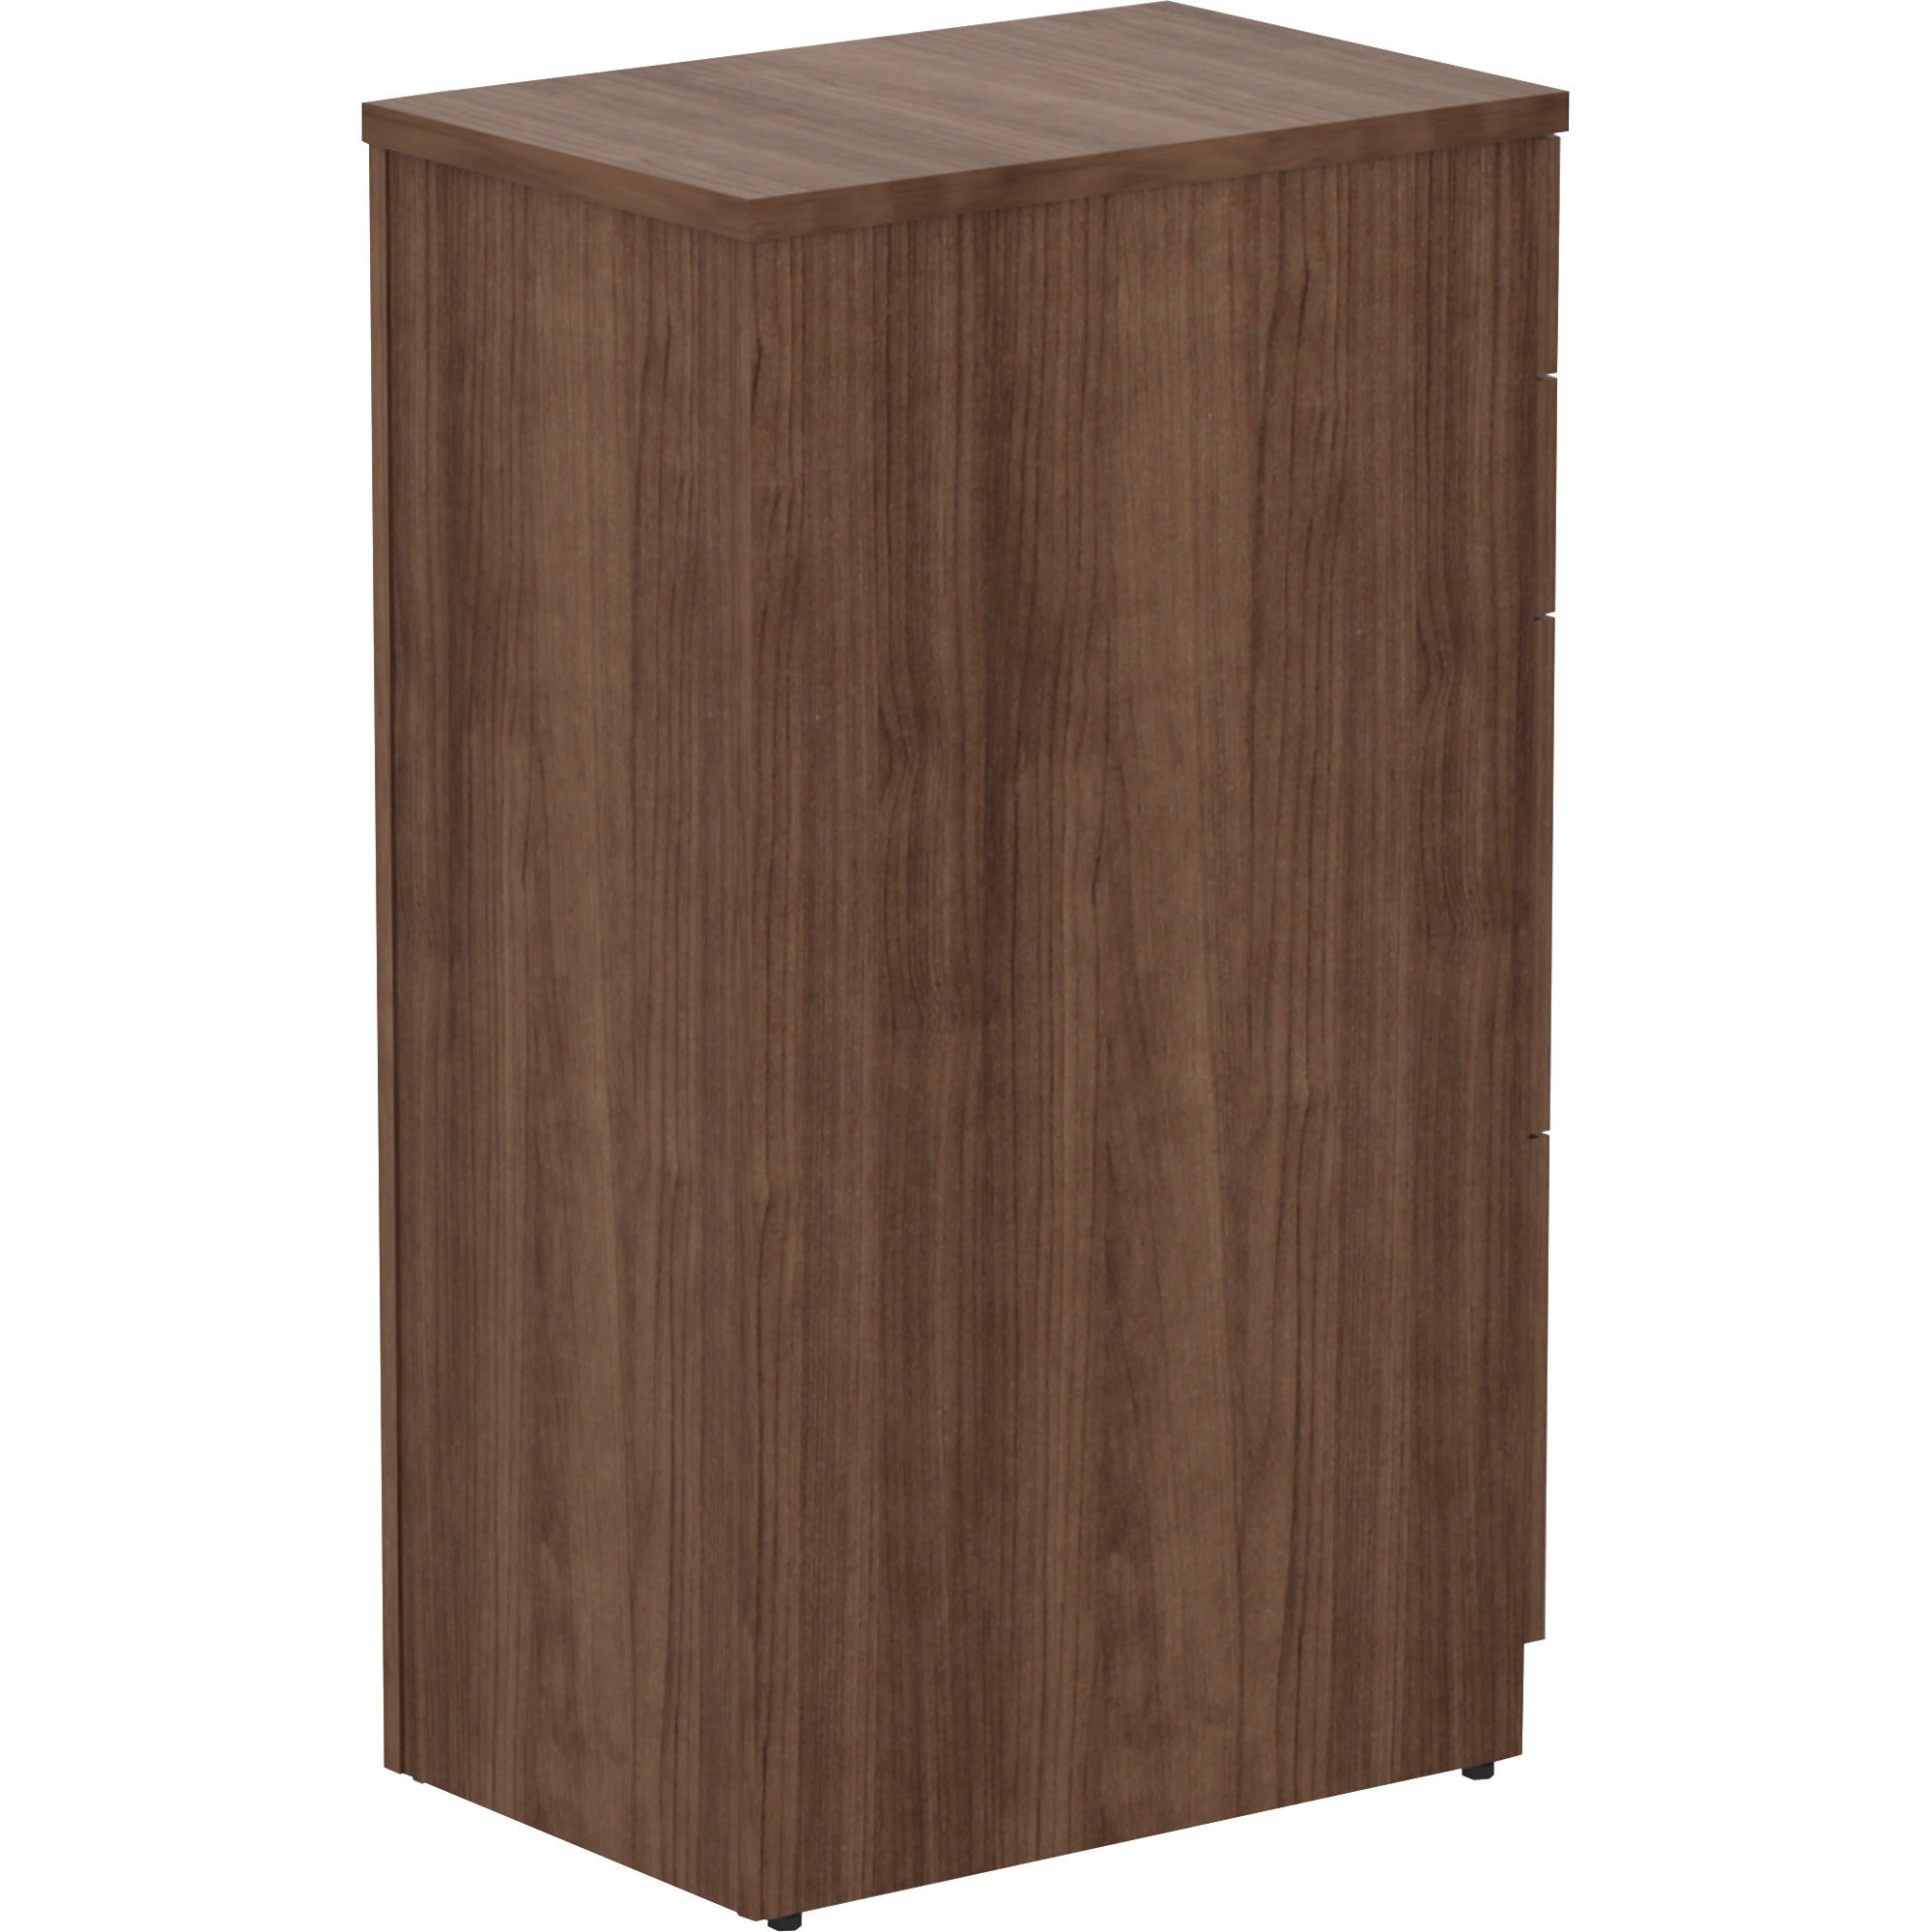 lorell-relevance-series-4-drawer-file-cabinet-155-x-236404-4-x-file-box-drawers-material-laminate-finish-walnut_llr16236 - 3